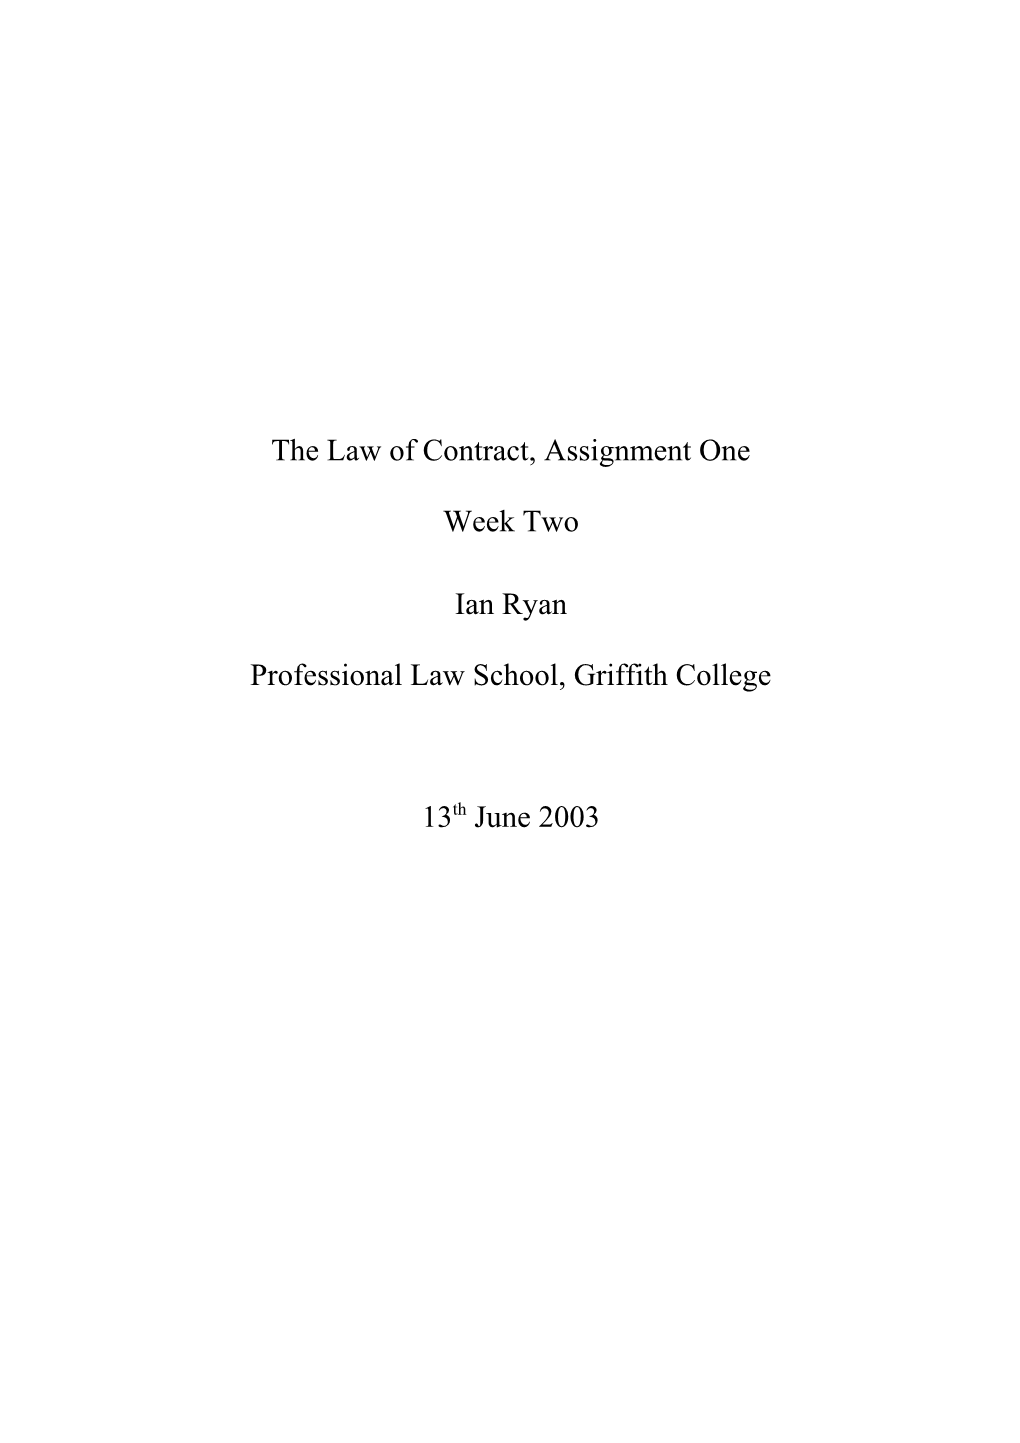 The Law of Torts, Assignment One